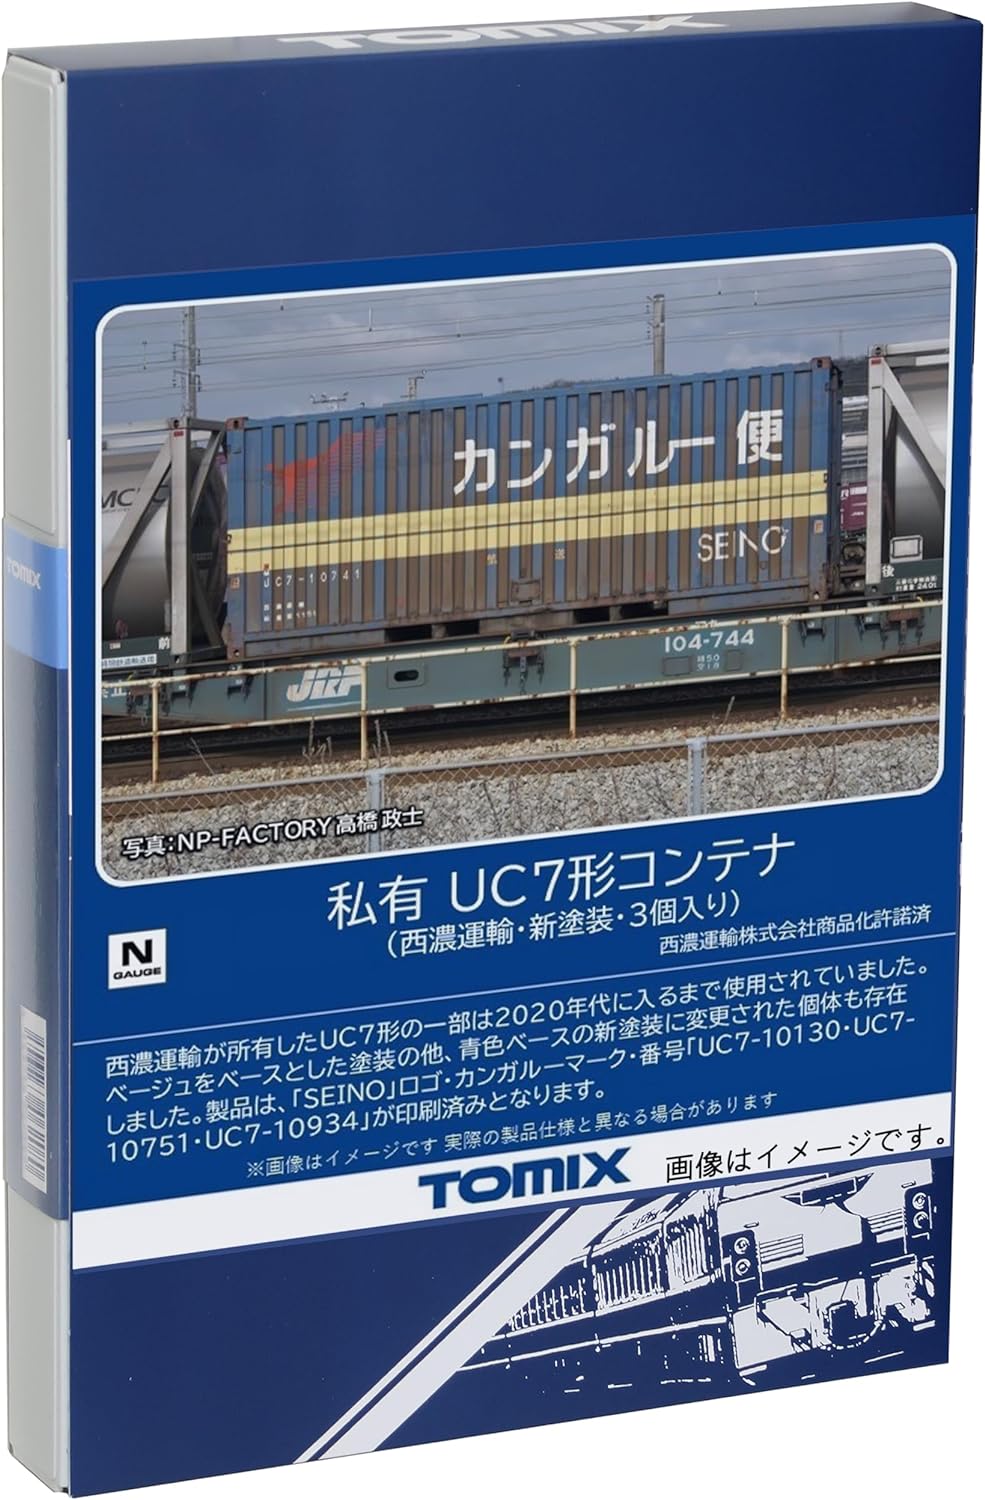 TOMIX 3185 N-Gauge Privately Owned UC7 Shaped Container, Seino Transport New Paint, 3 Pieces - BanzaiHobby